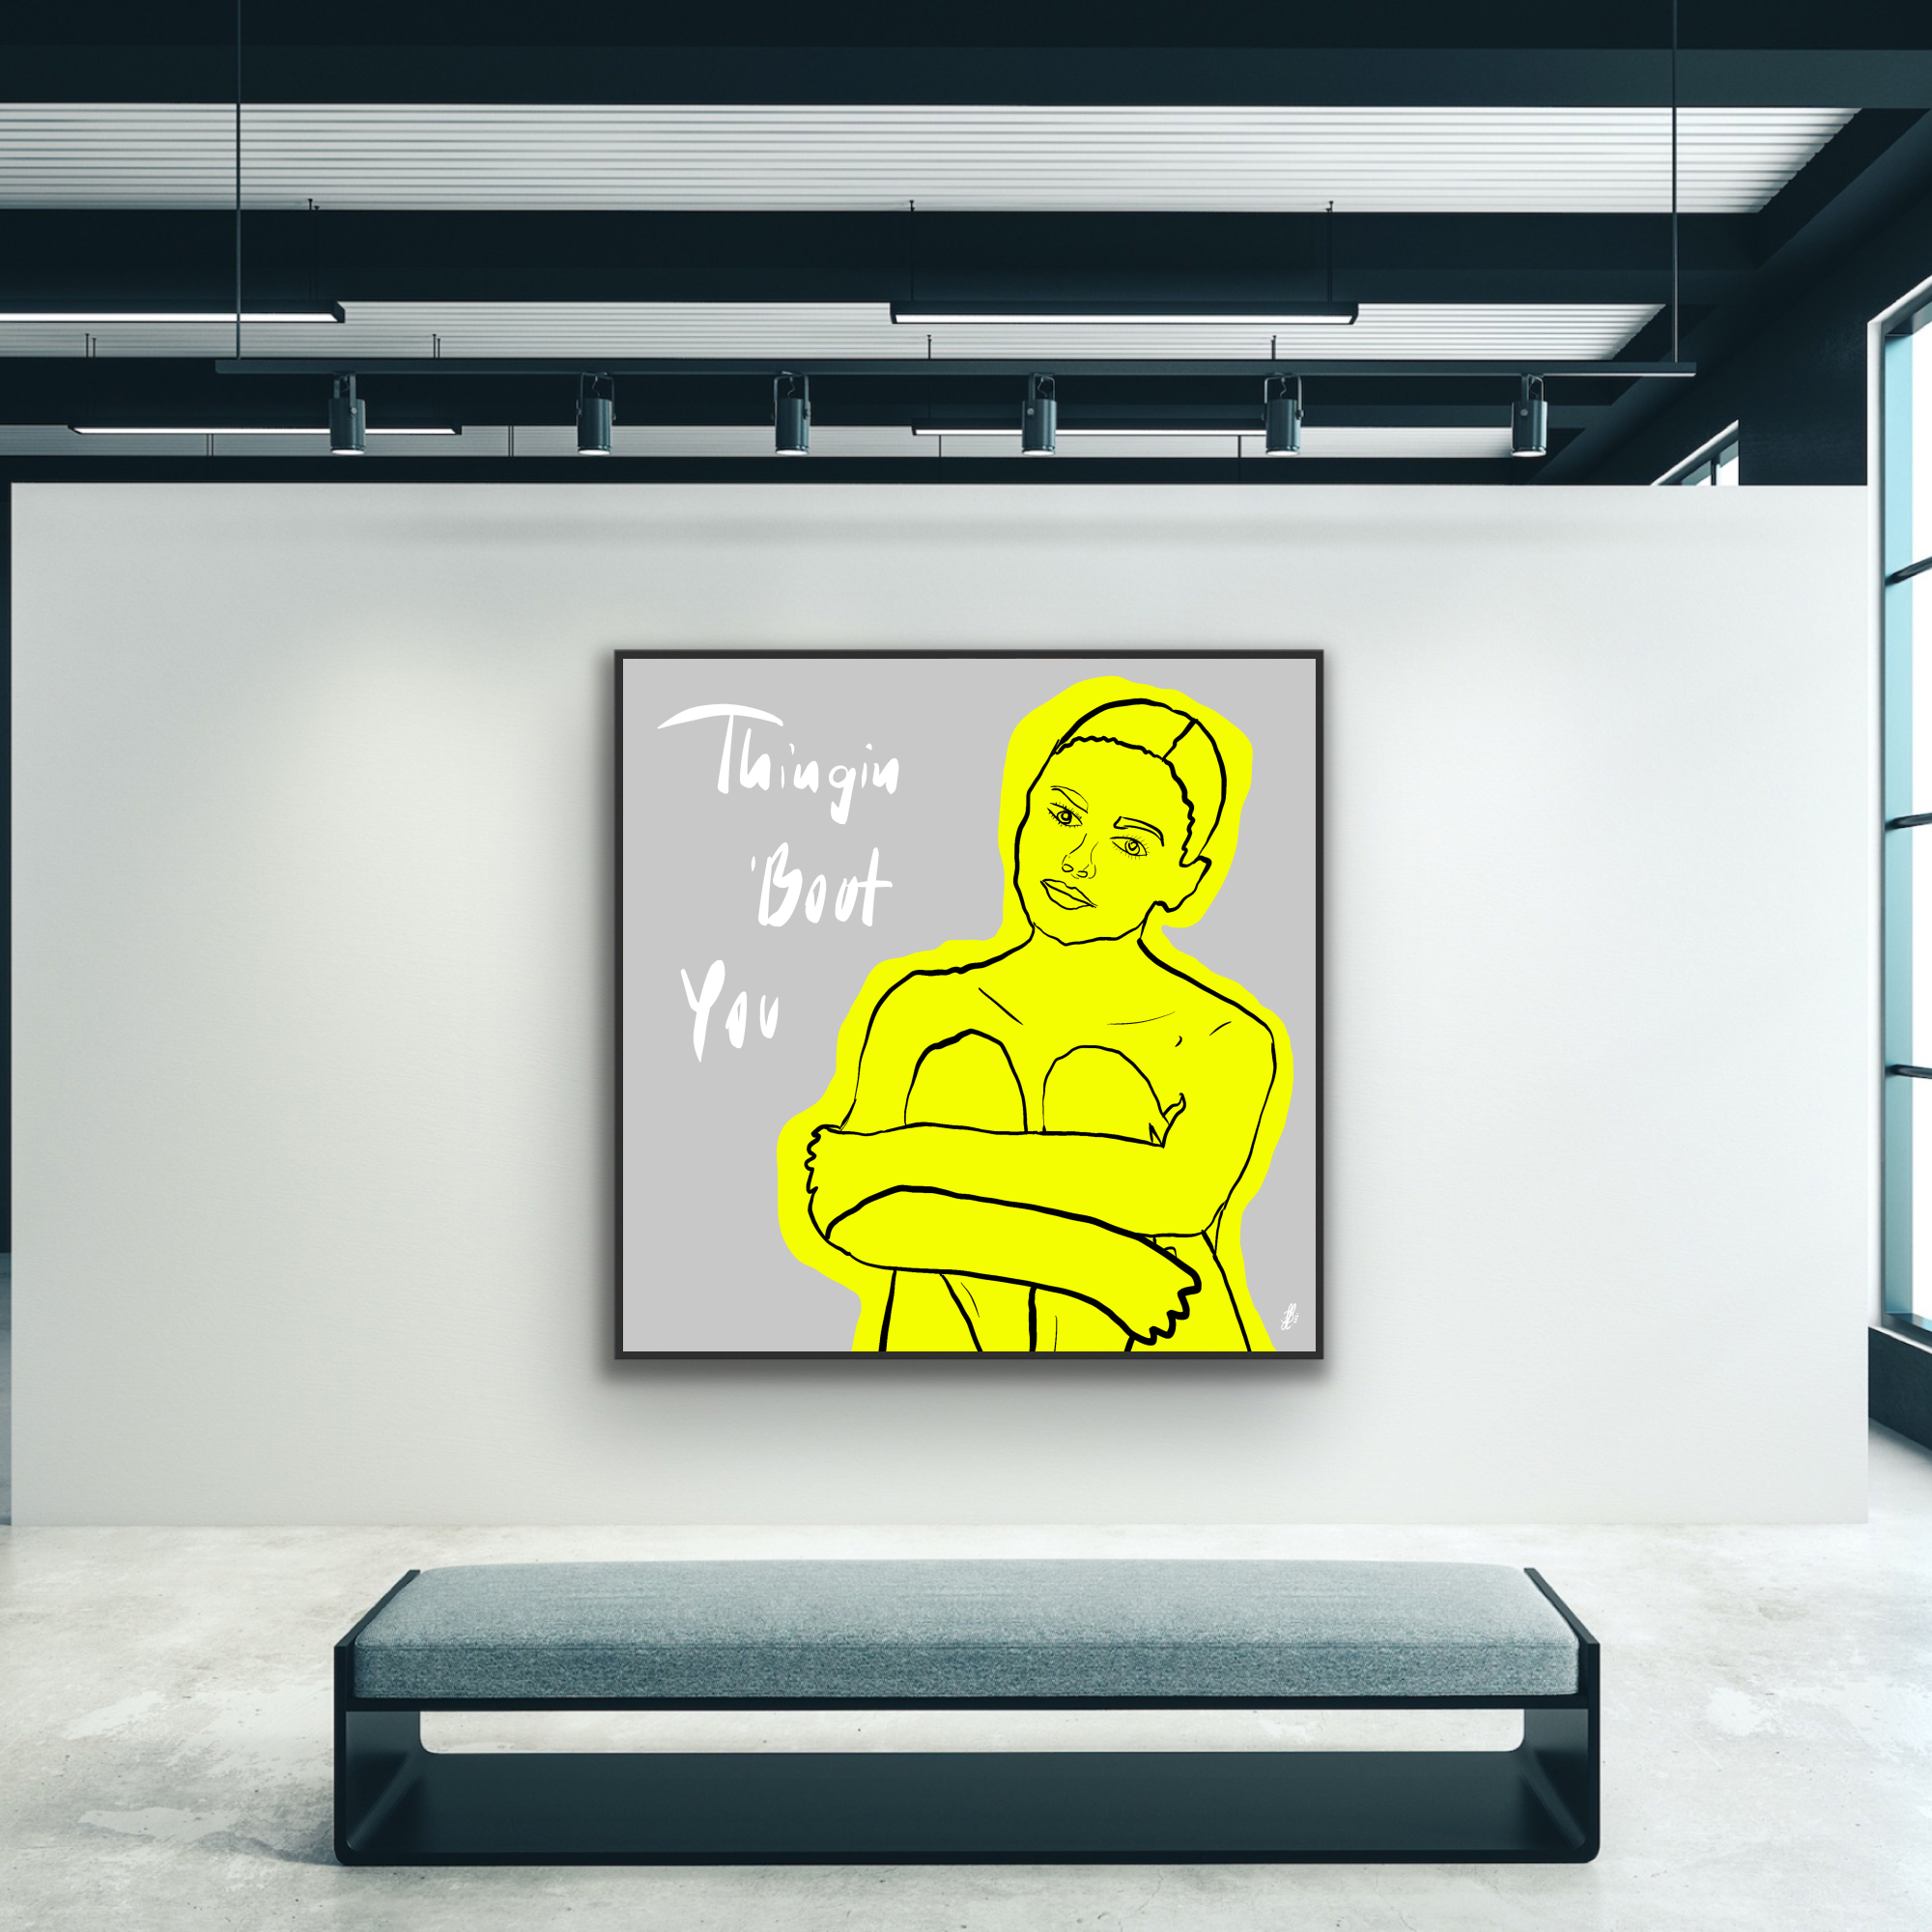 Canvas print: "Thinkin Bout You"